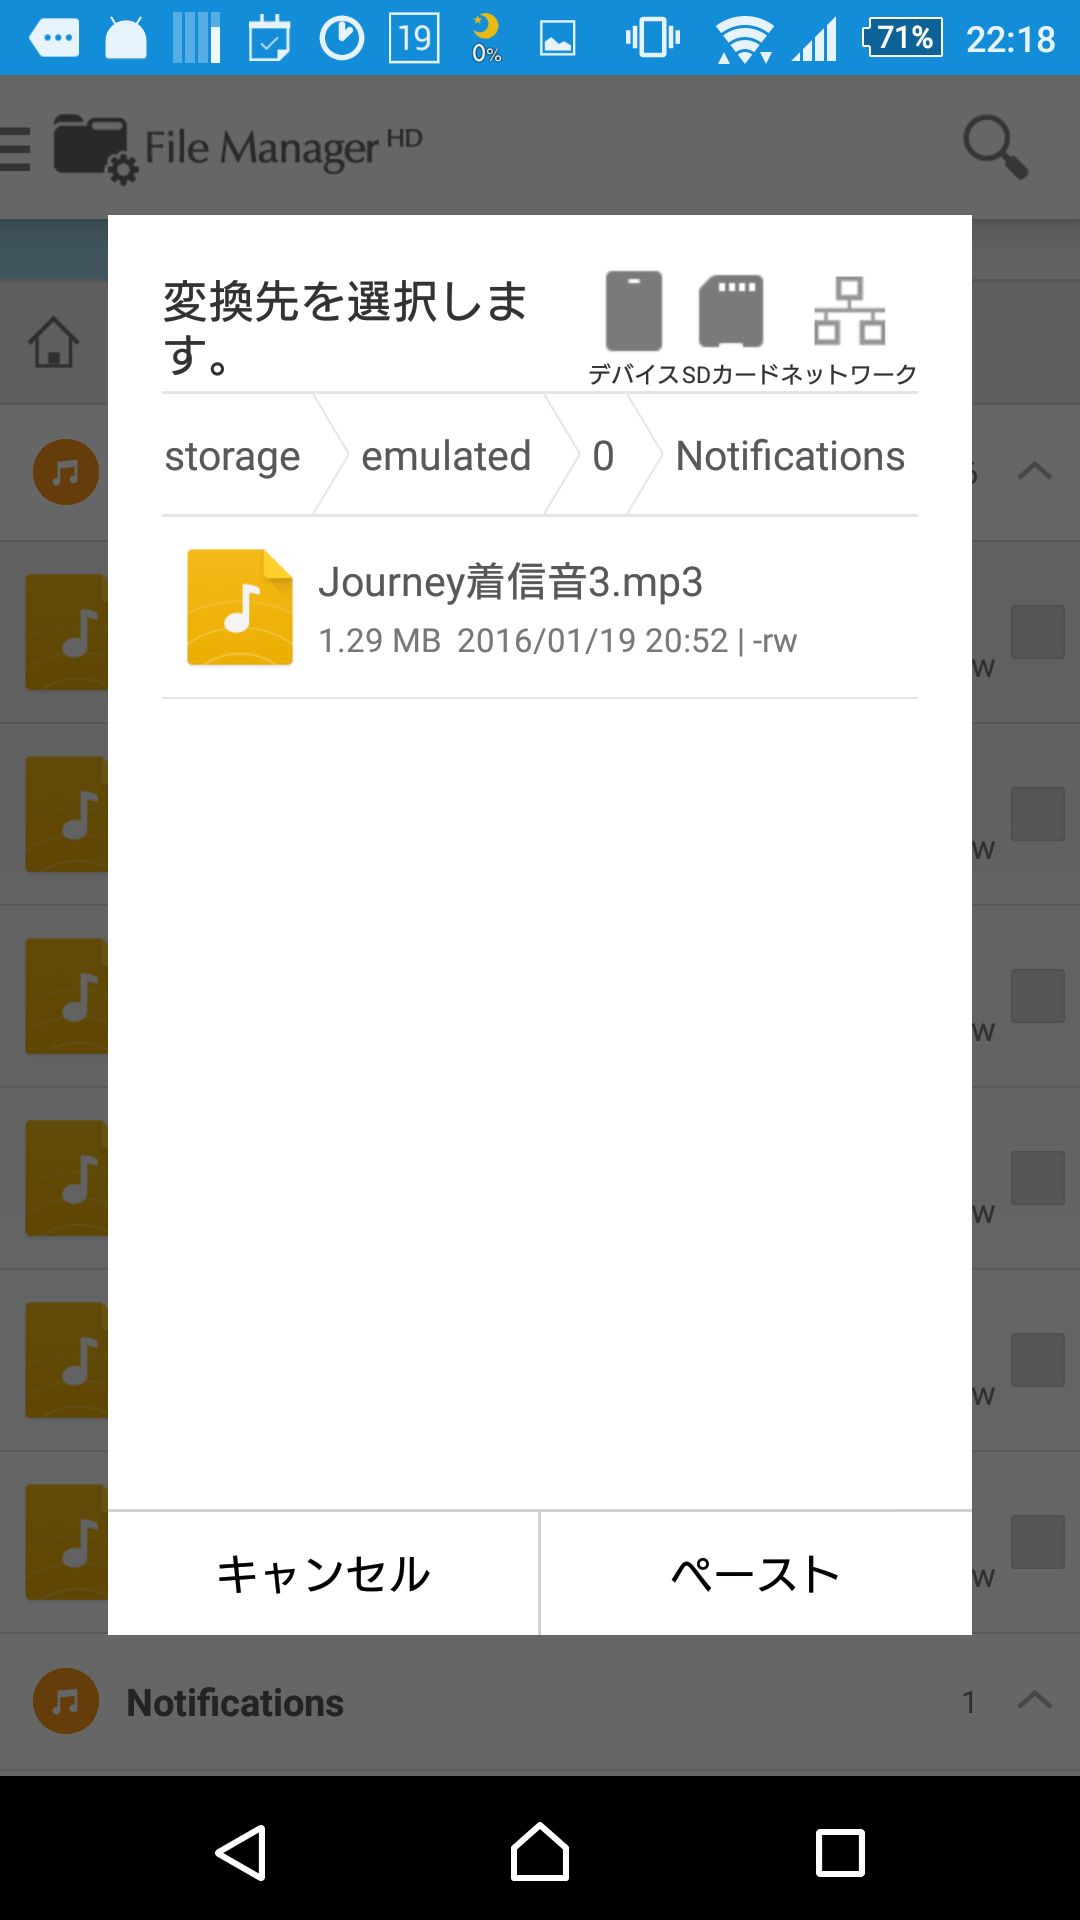 storage/emulated/0/Notifications